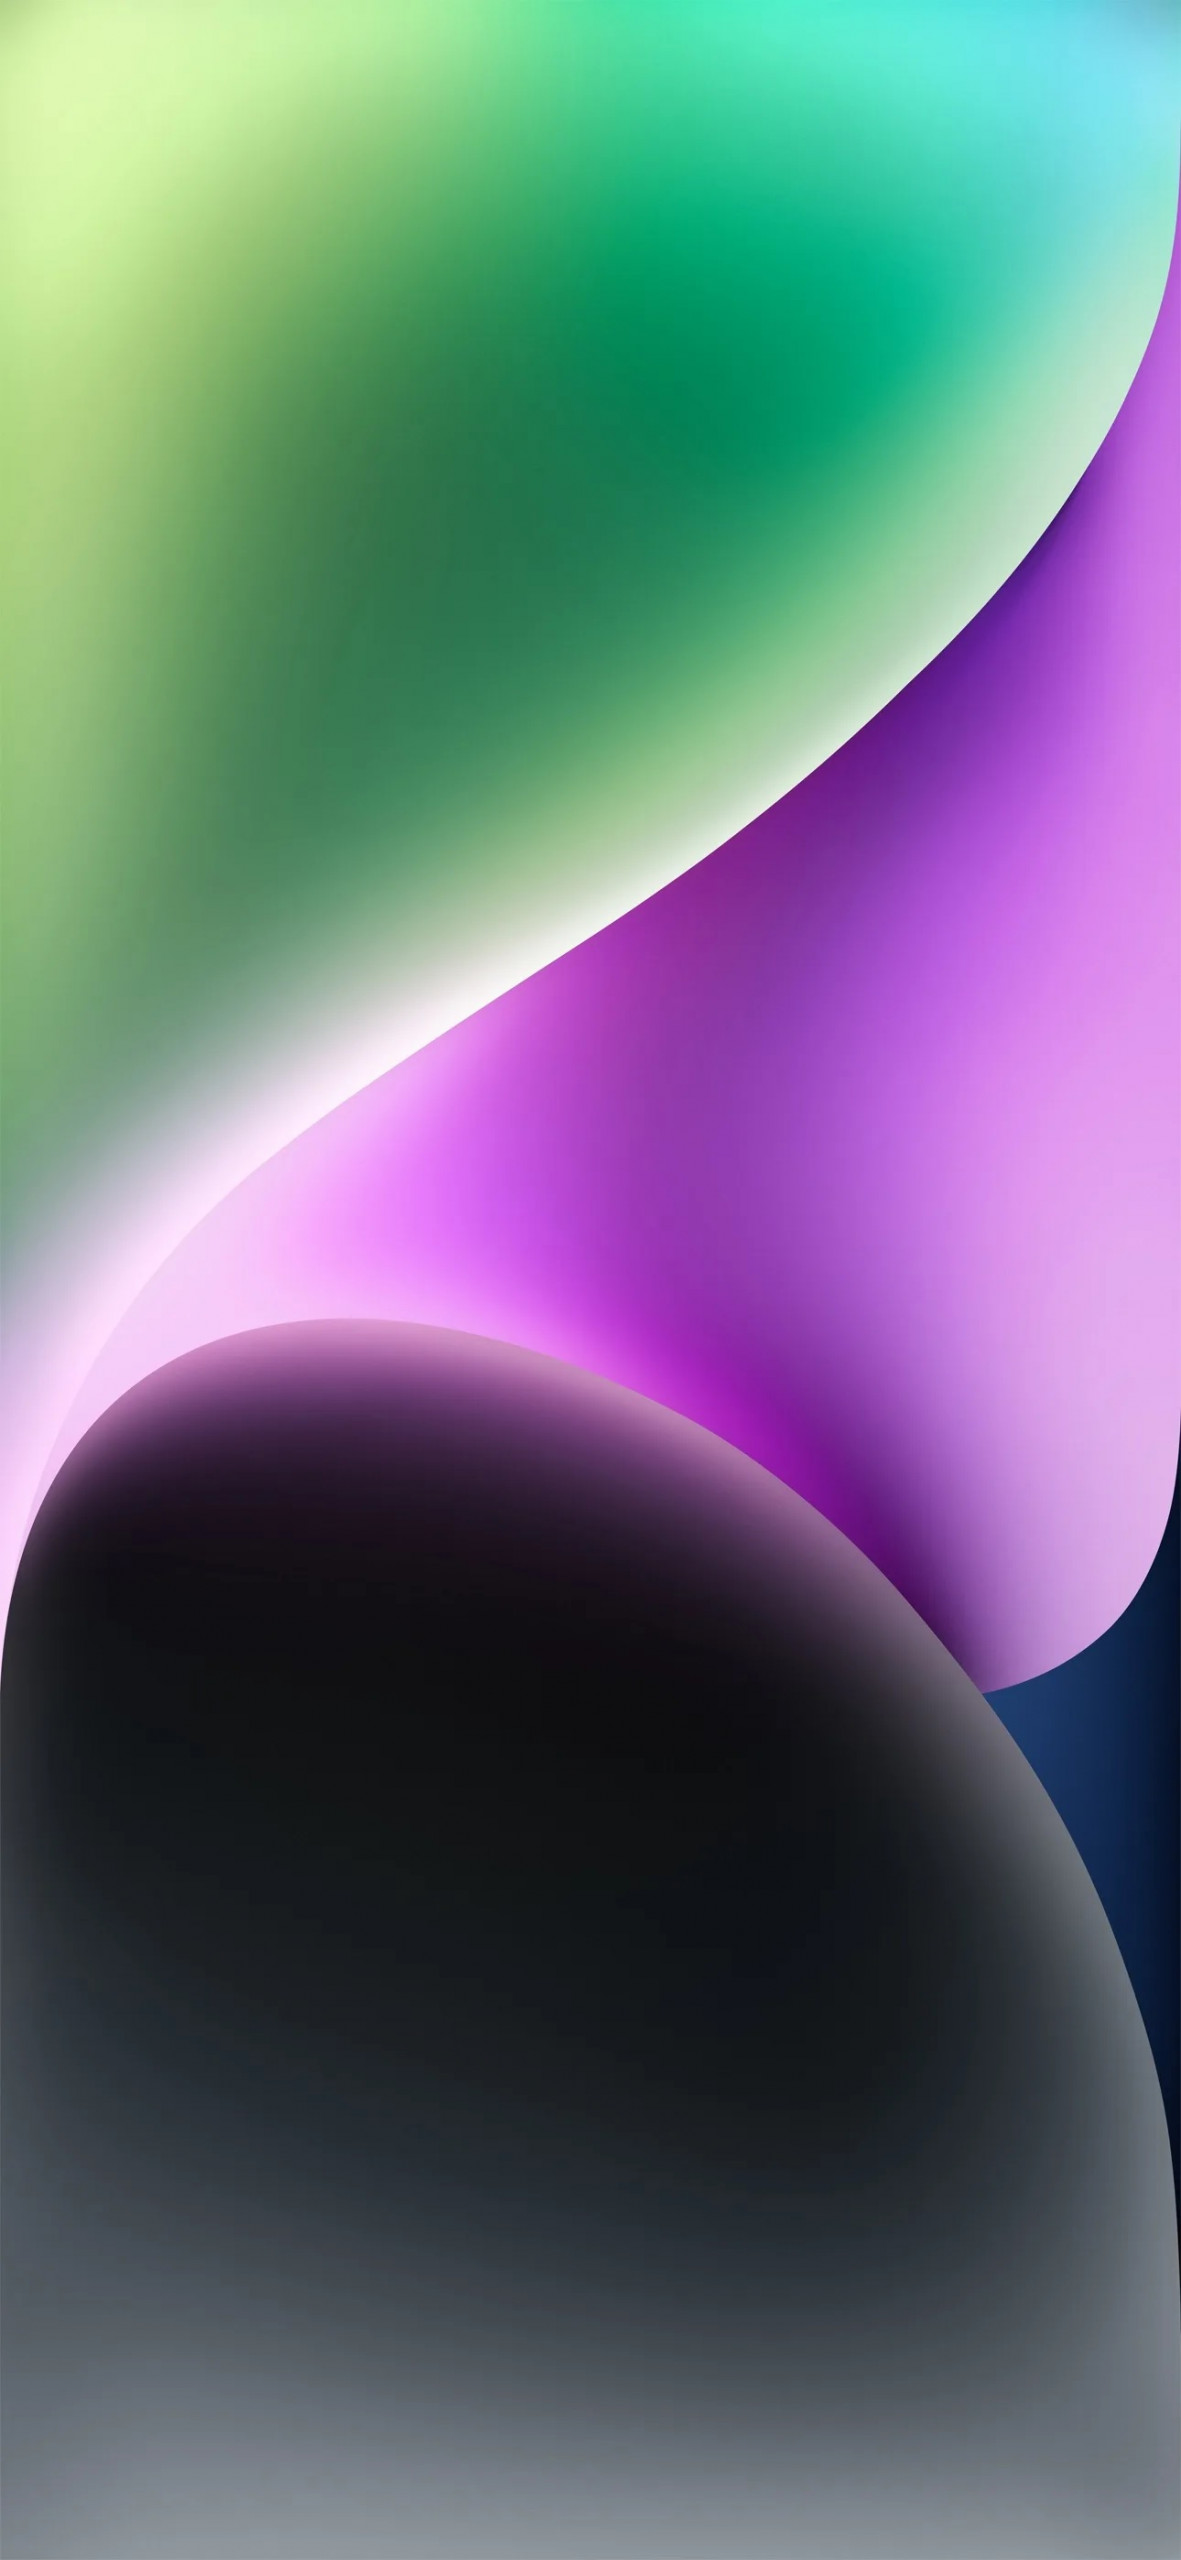 Iphone 14 Pro Wallpaper 6 Scaled -How To Get The New Ios 14 Wallpapers On Your Iphone